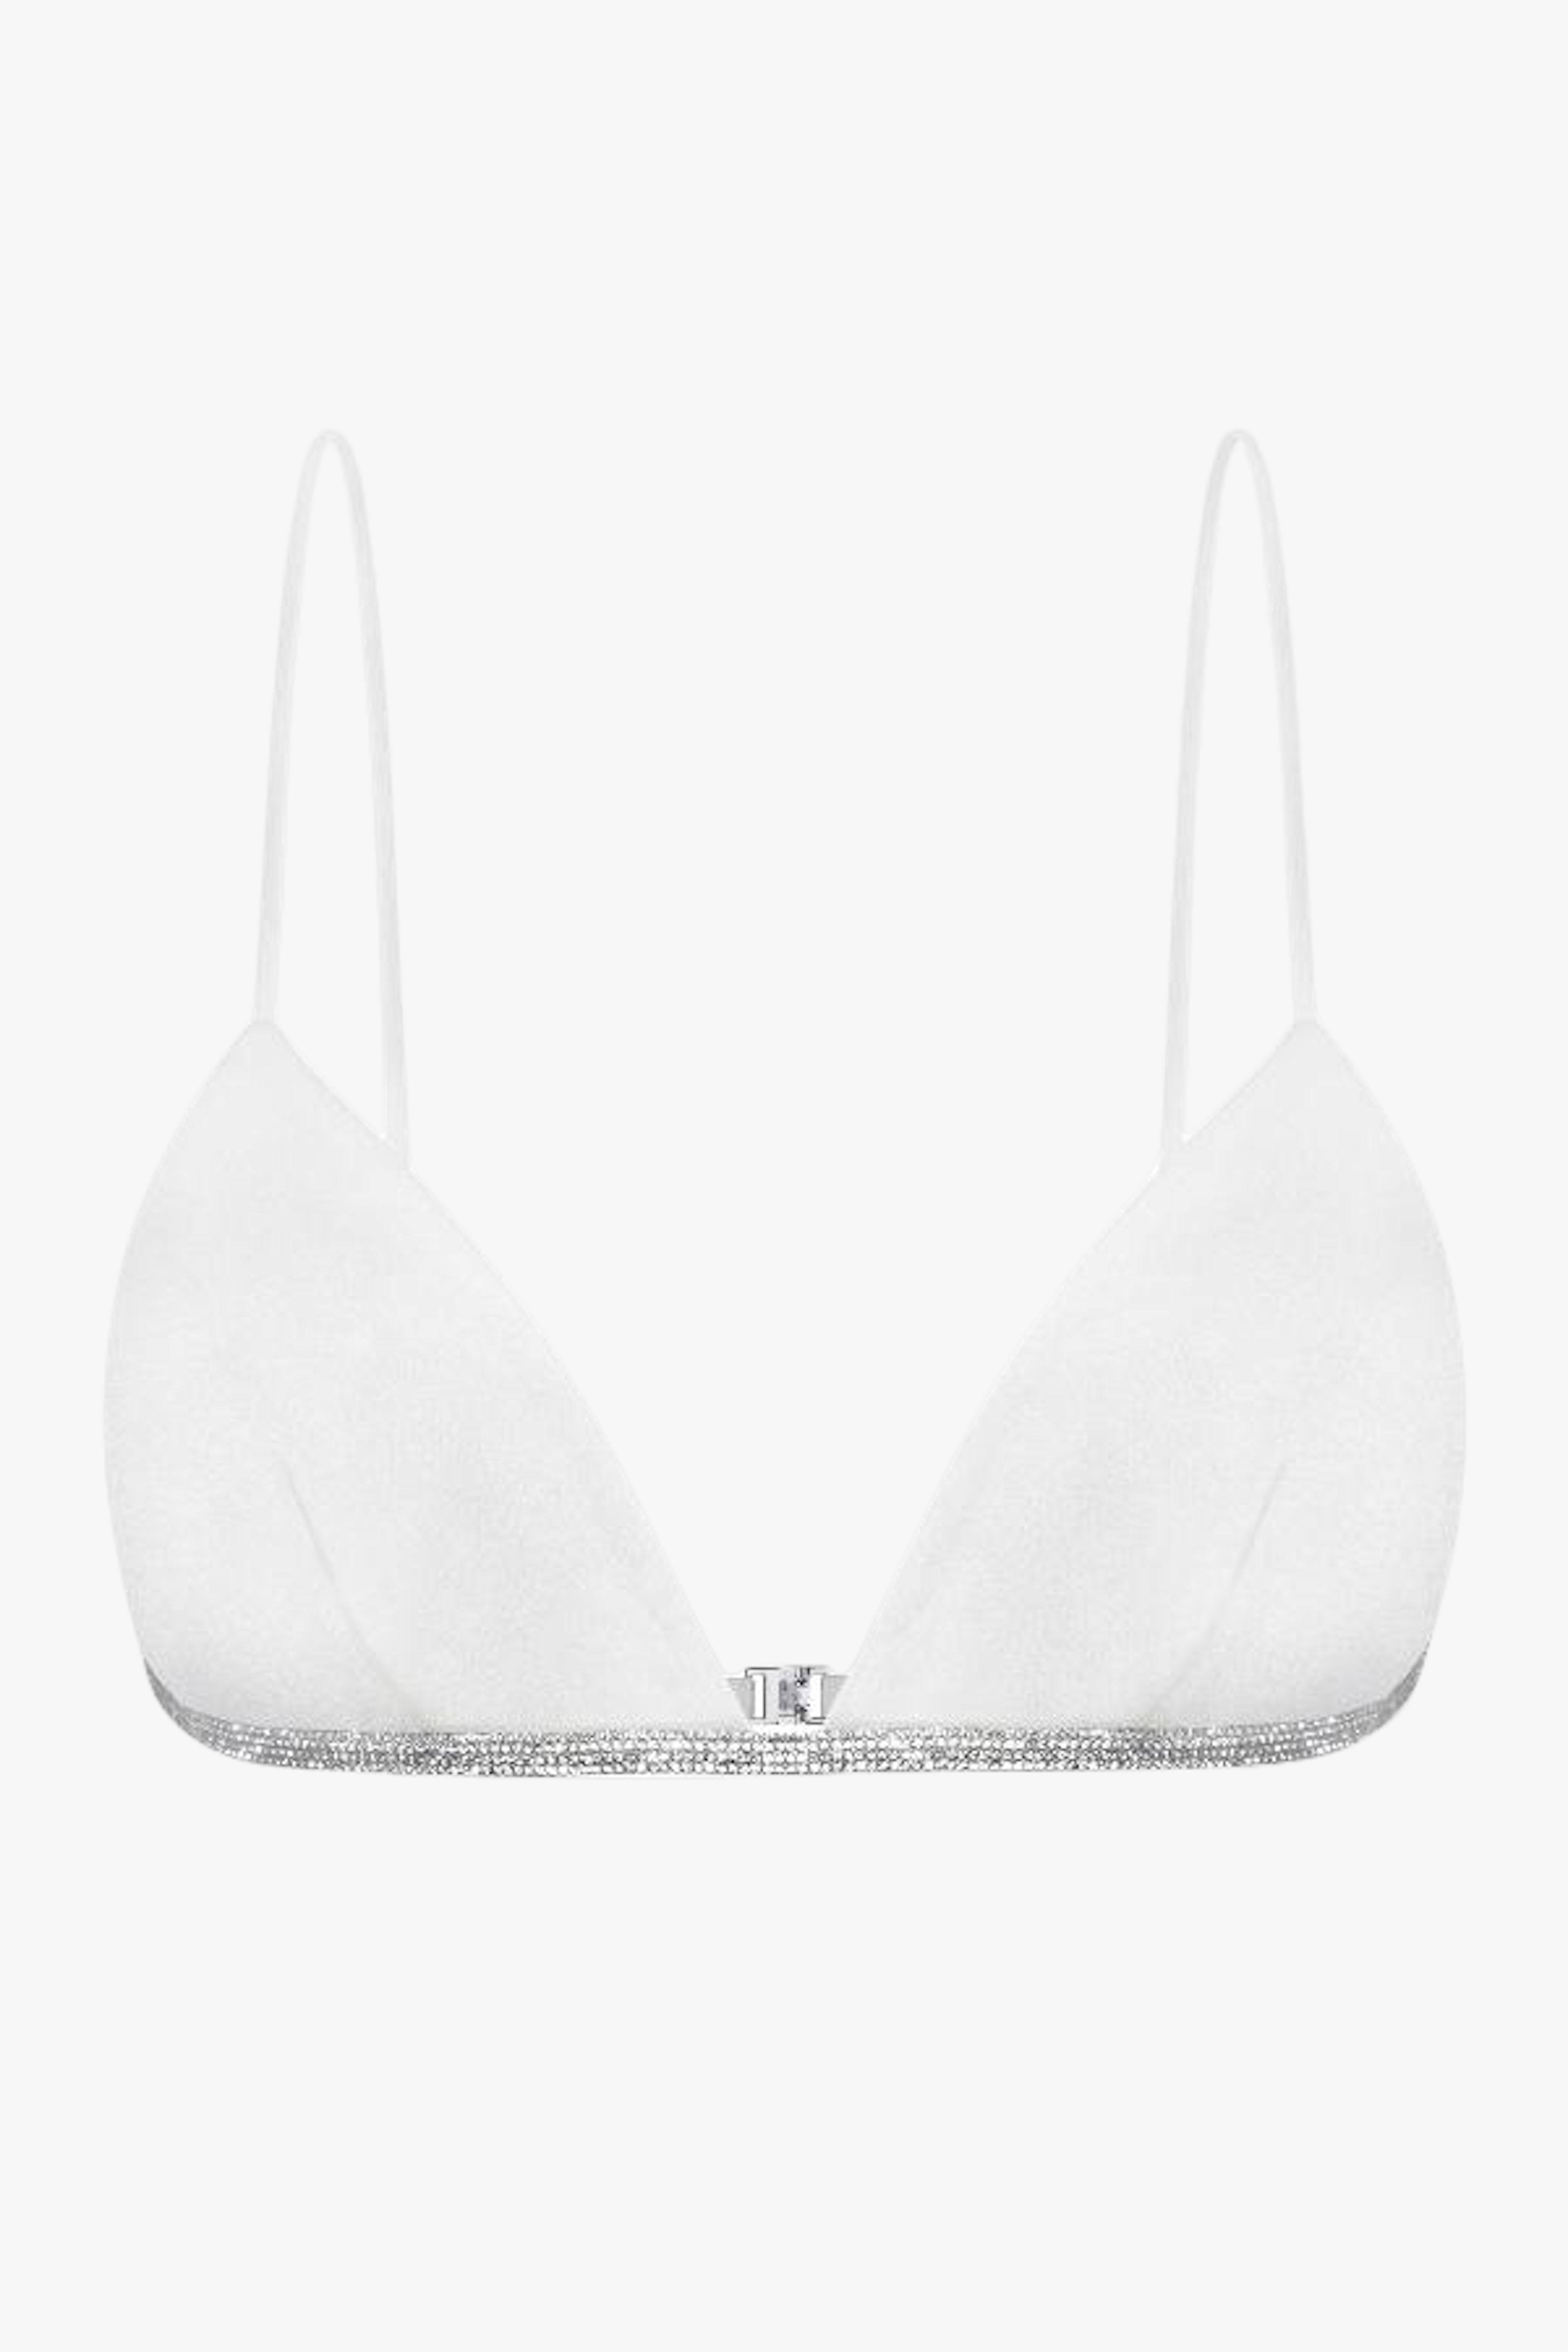 Shop TRIANGLE BRA from NUÉ at Seezona